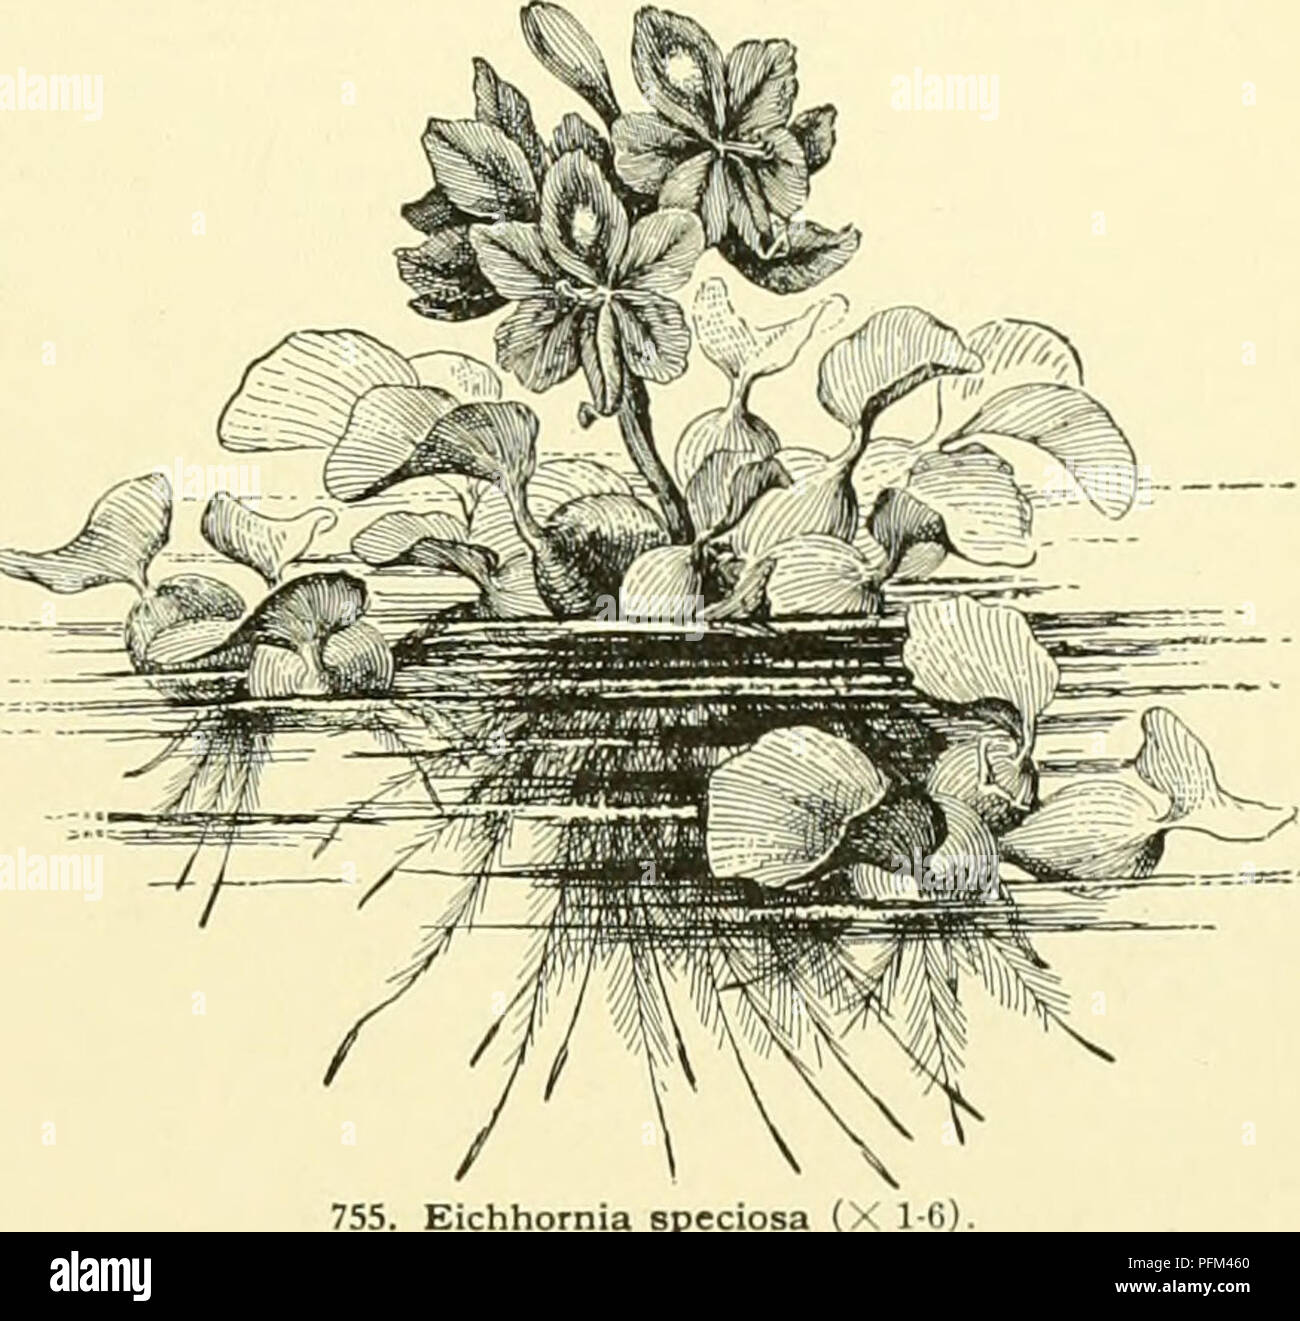 . Cyclopedia of American horticulture, comprising suggestions for cultivation of horticultural plants, descriptions of the species of fruits, vegetables, flowers and ornamental plants sold in the United States and Canada, together with geographical and biographical sketches, and a synopsis of the vegetable kingdom. Gardening -- Dictionaries; Plants -- North America encyclopedias. EICHHORNIA EL.EAGNUS 525 A. Leaf-stalks inflated: inner periauth-segnients not serrated. specidsa, Kunth (£. crdssipesy Solms. Pontederia crdssipes. Mart.). Fig. 755. Lvs. in tufts, all con- stricted at the middle, bl Stock Photo